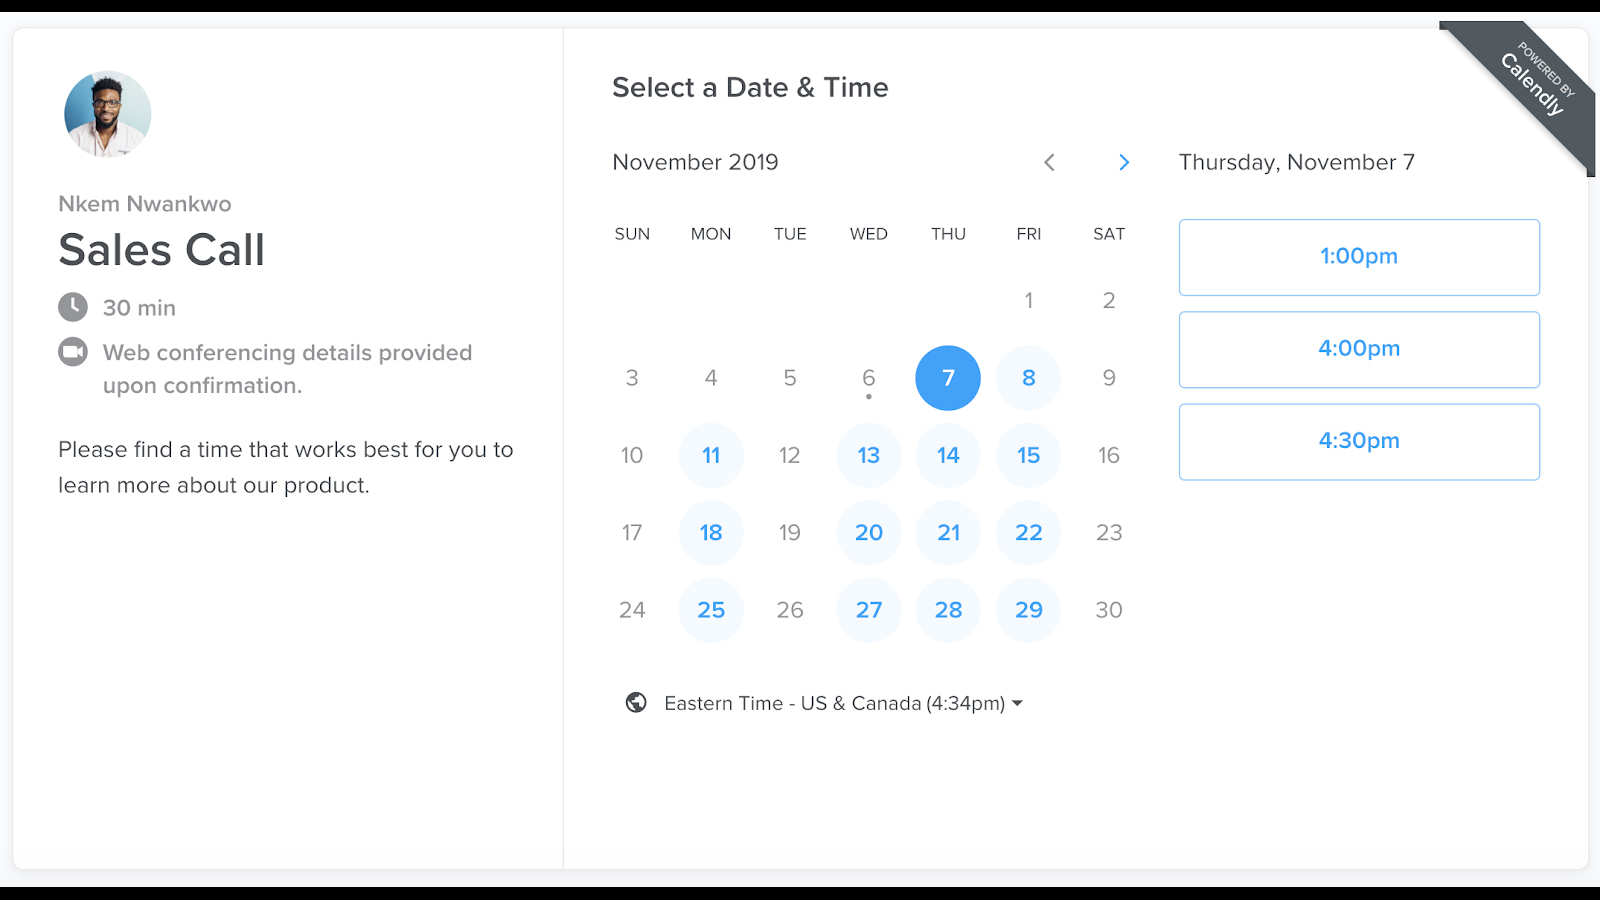 Scheduling calendar from Calendly.